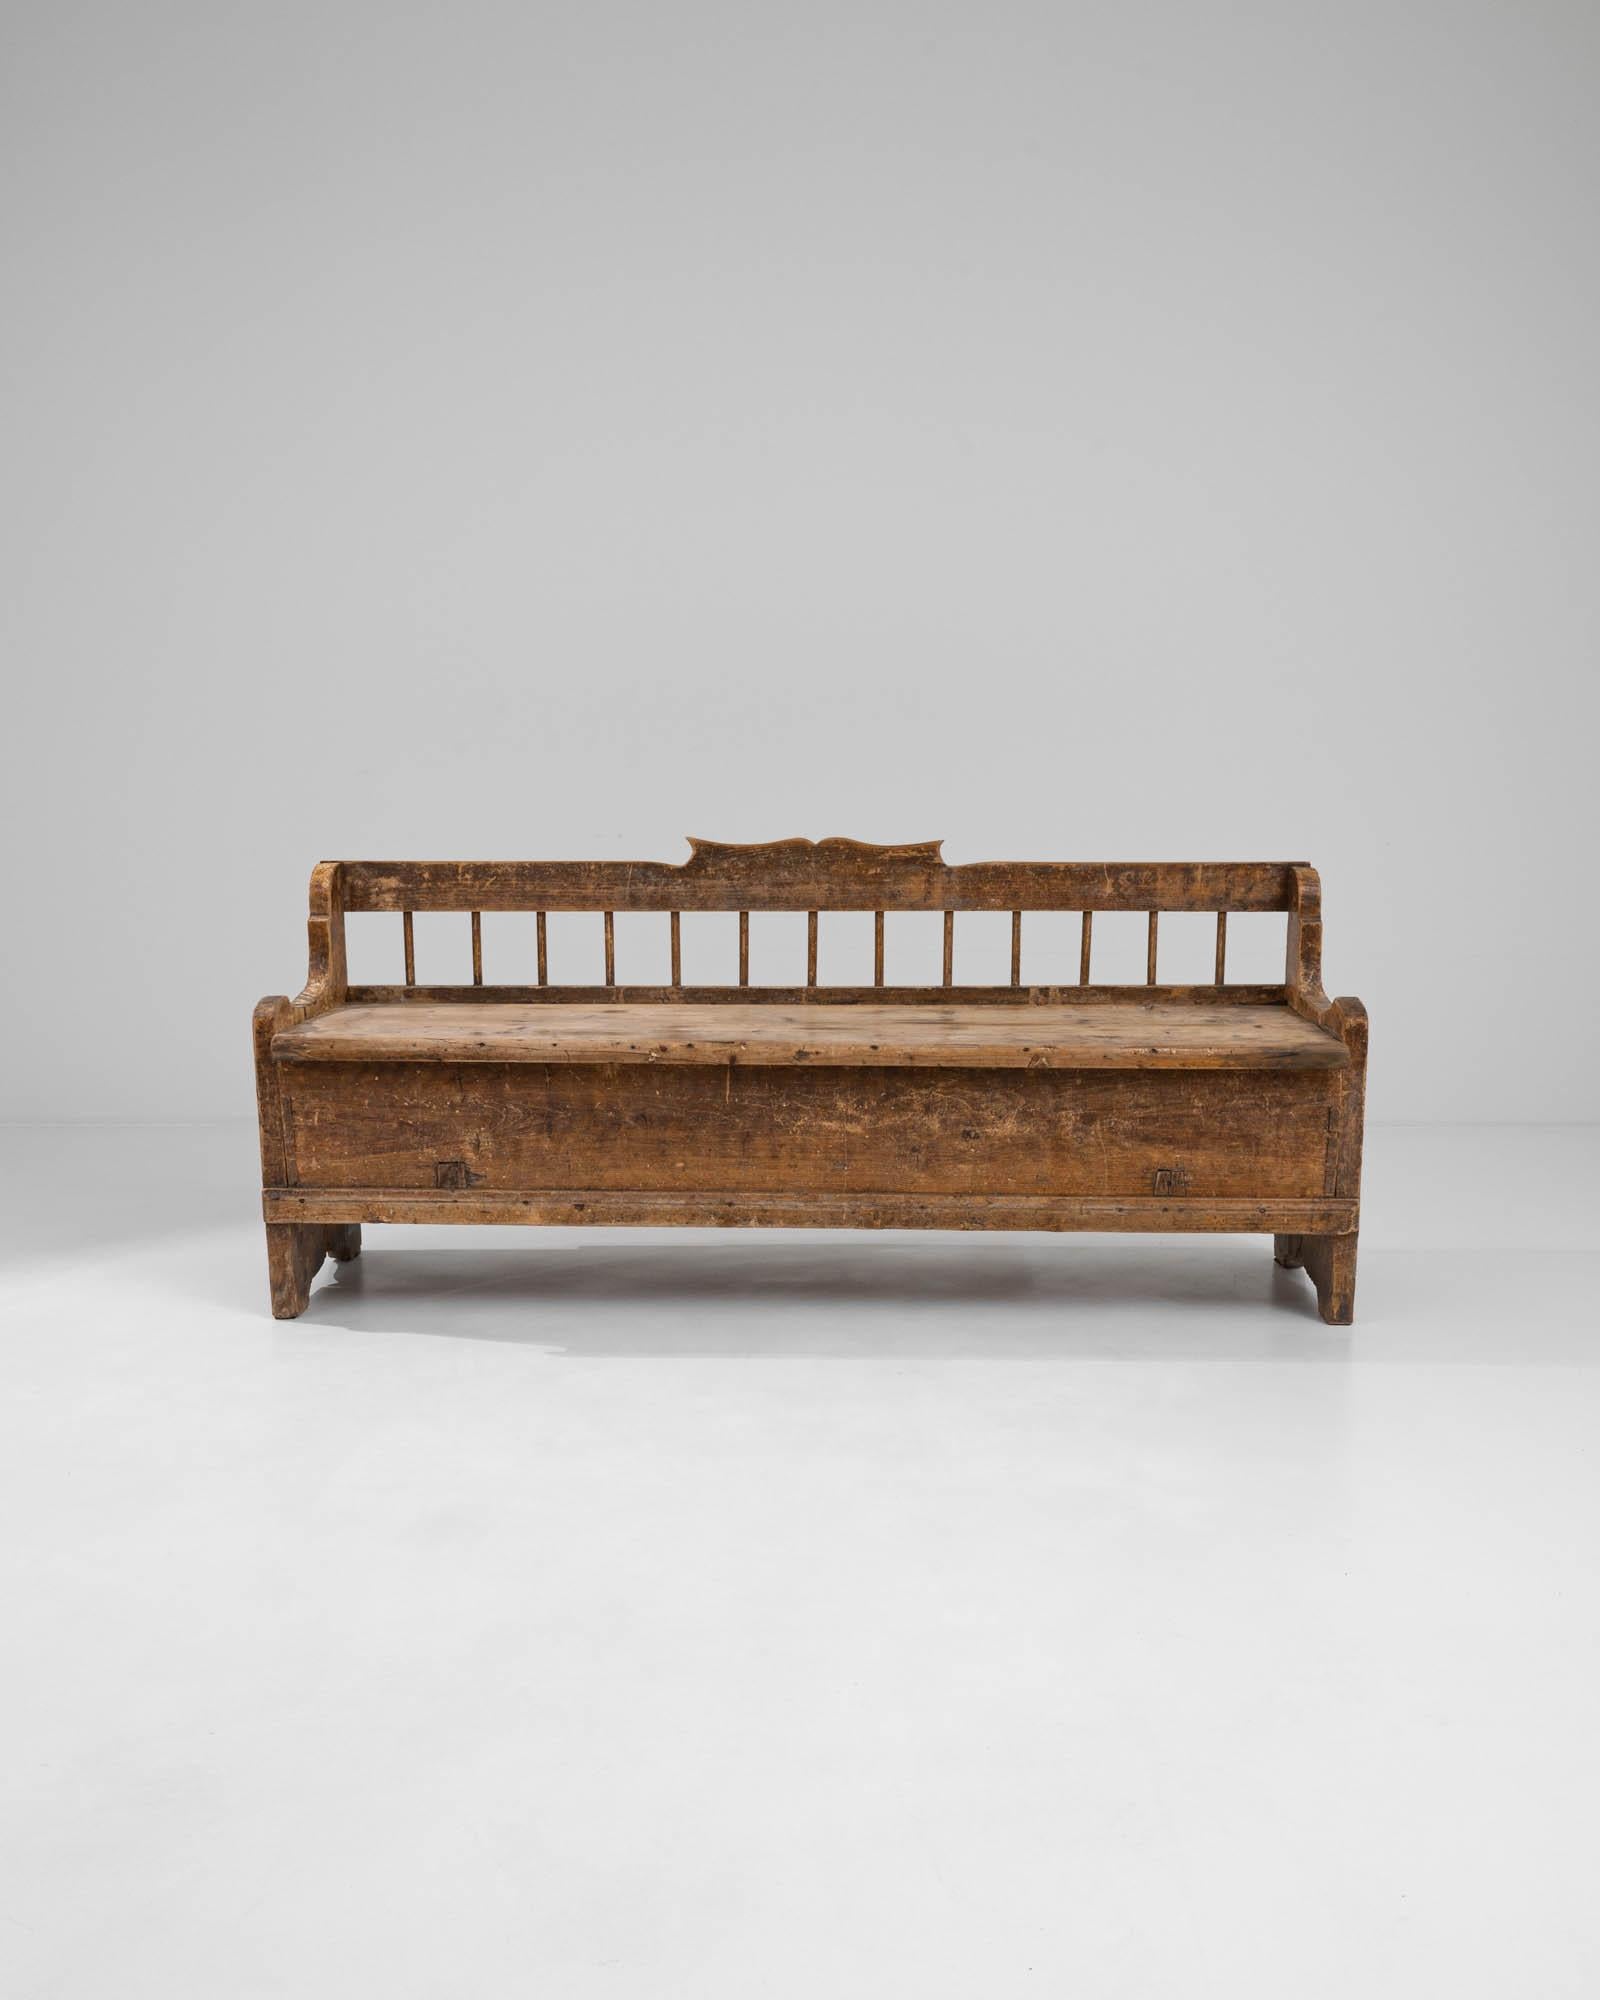 A wooden bench created in 19th century Scandinavia. Weathered, yet resiliently and timelessly elegant, this solid wood bench holds a mature poise. With thoughtfully curved arms, a sculpted back, and minimal backrest spindles, this artisanal bench